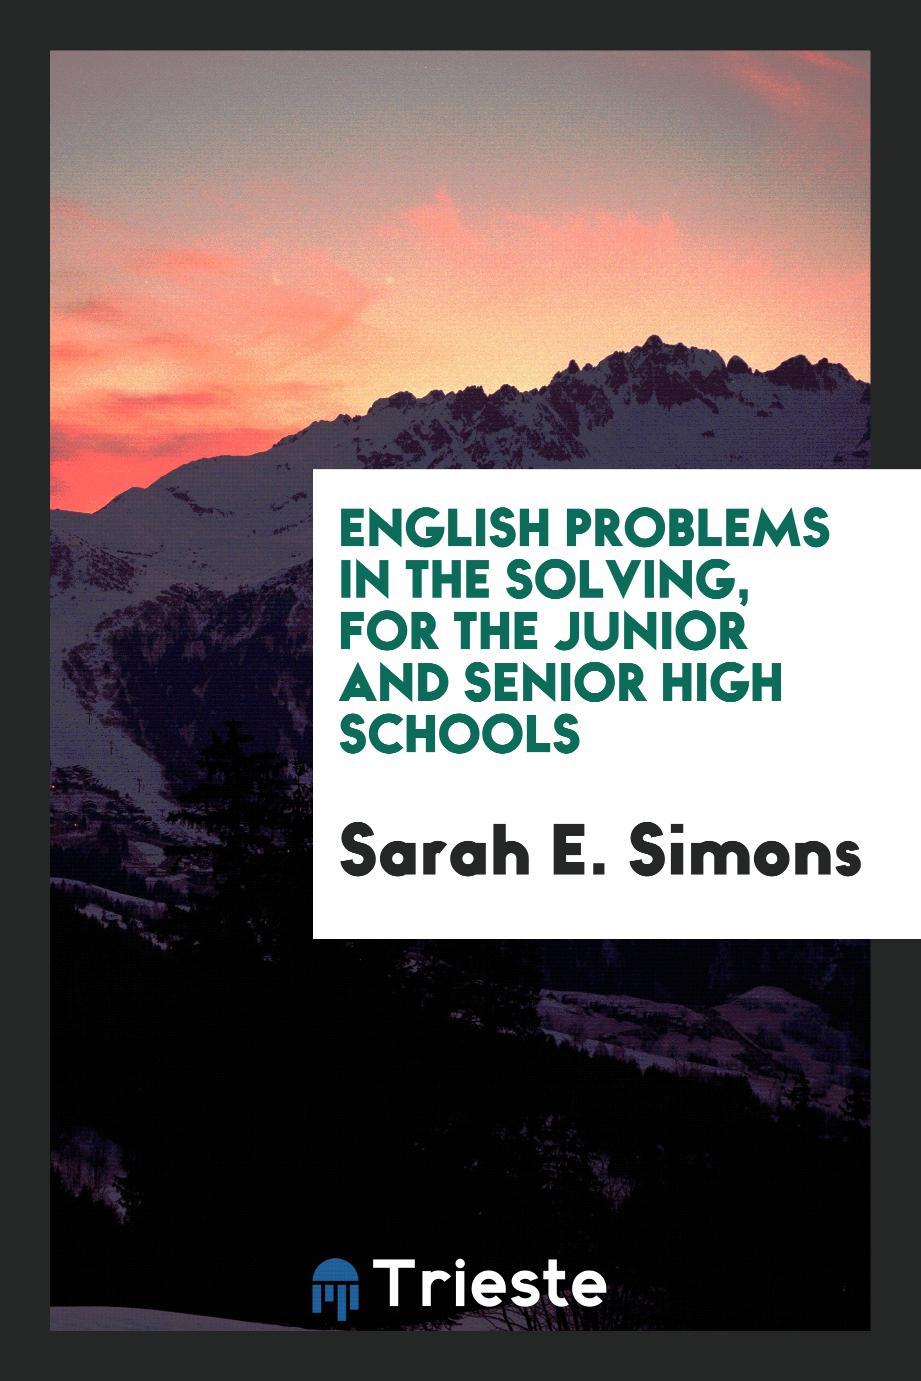 English problems in the solving, for the junior and senior high schools